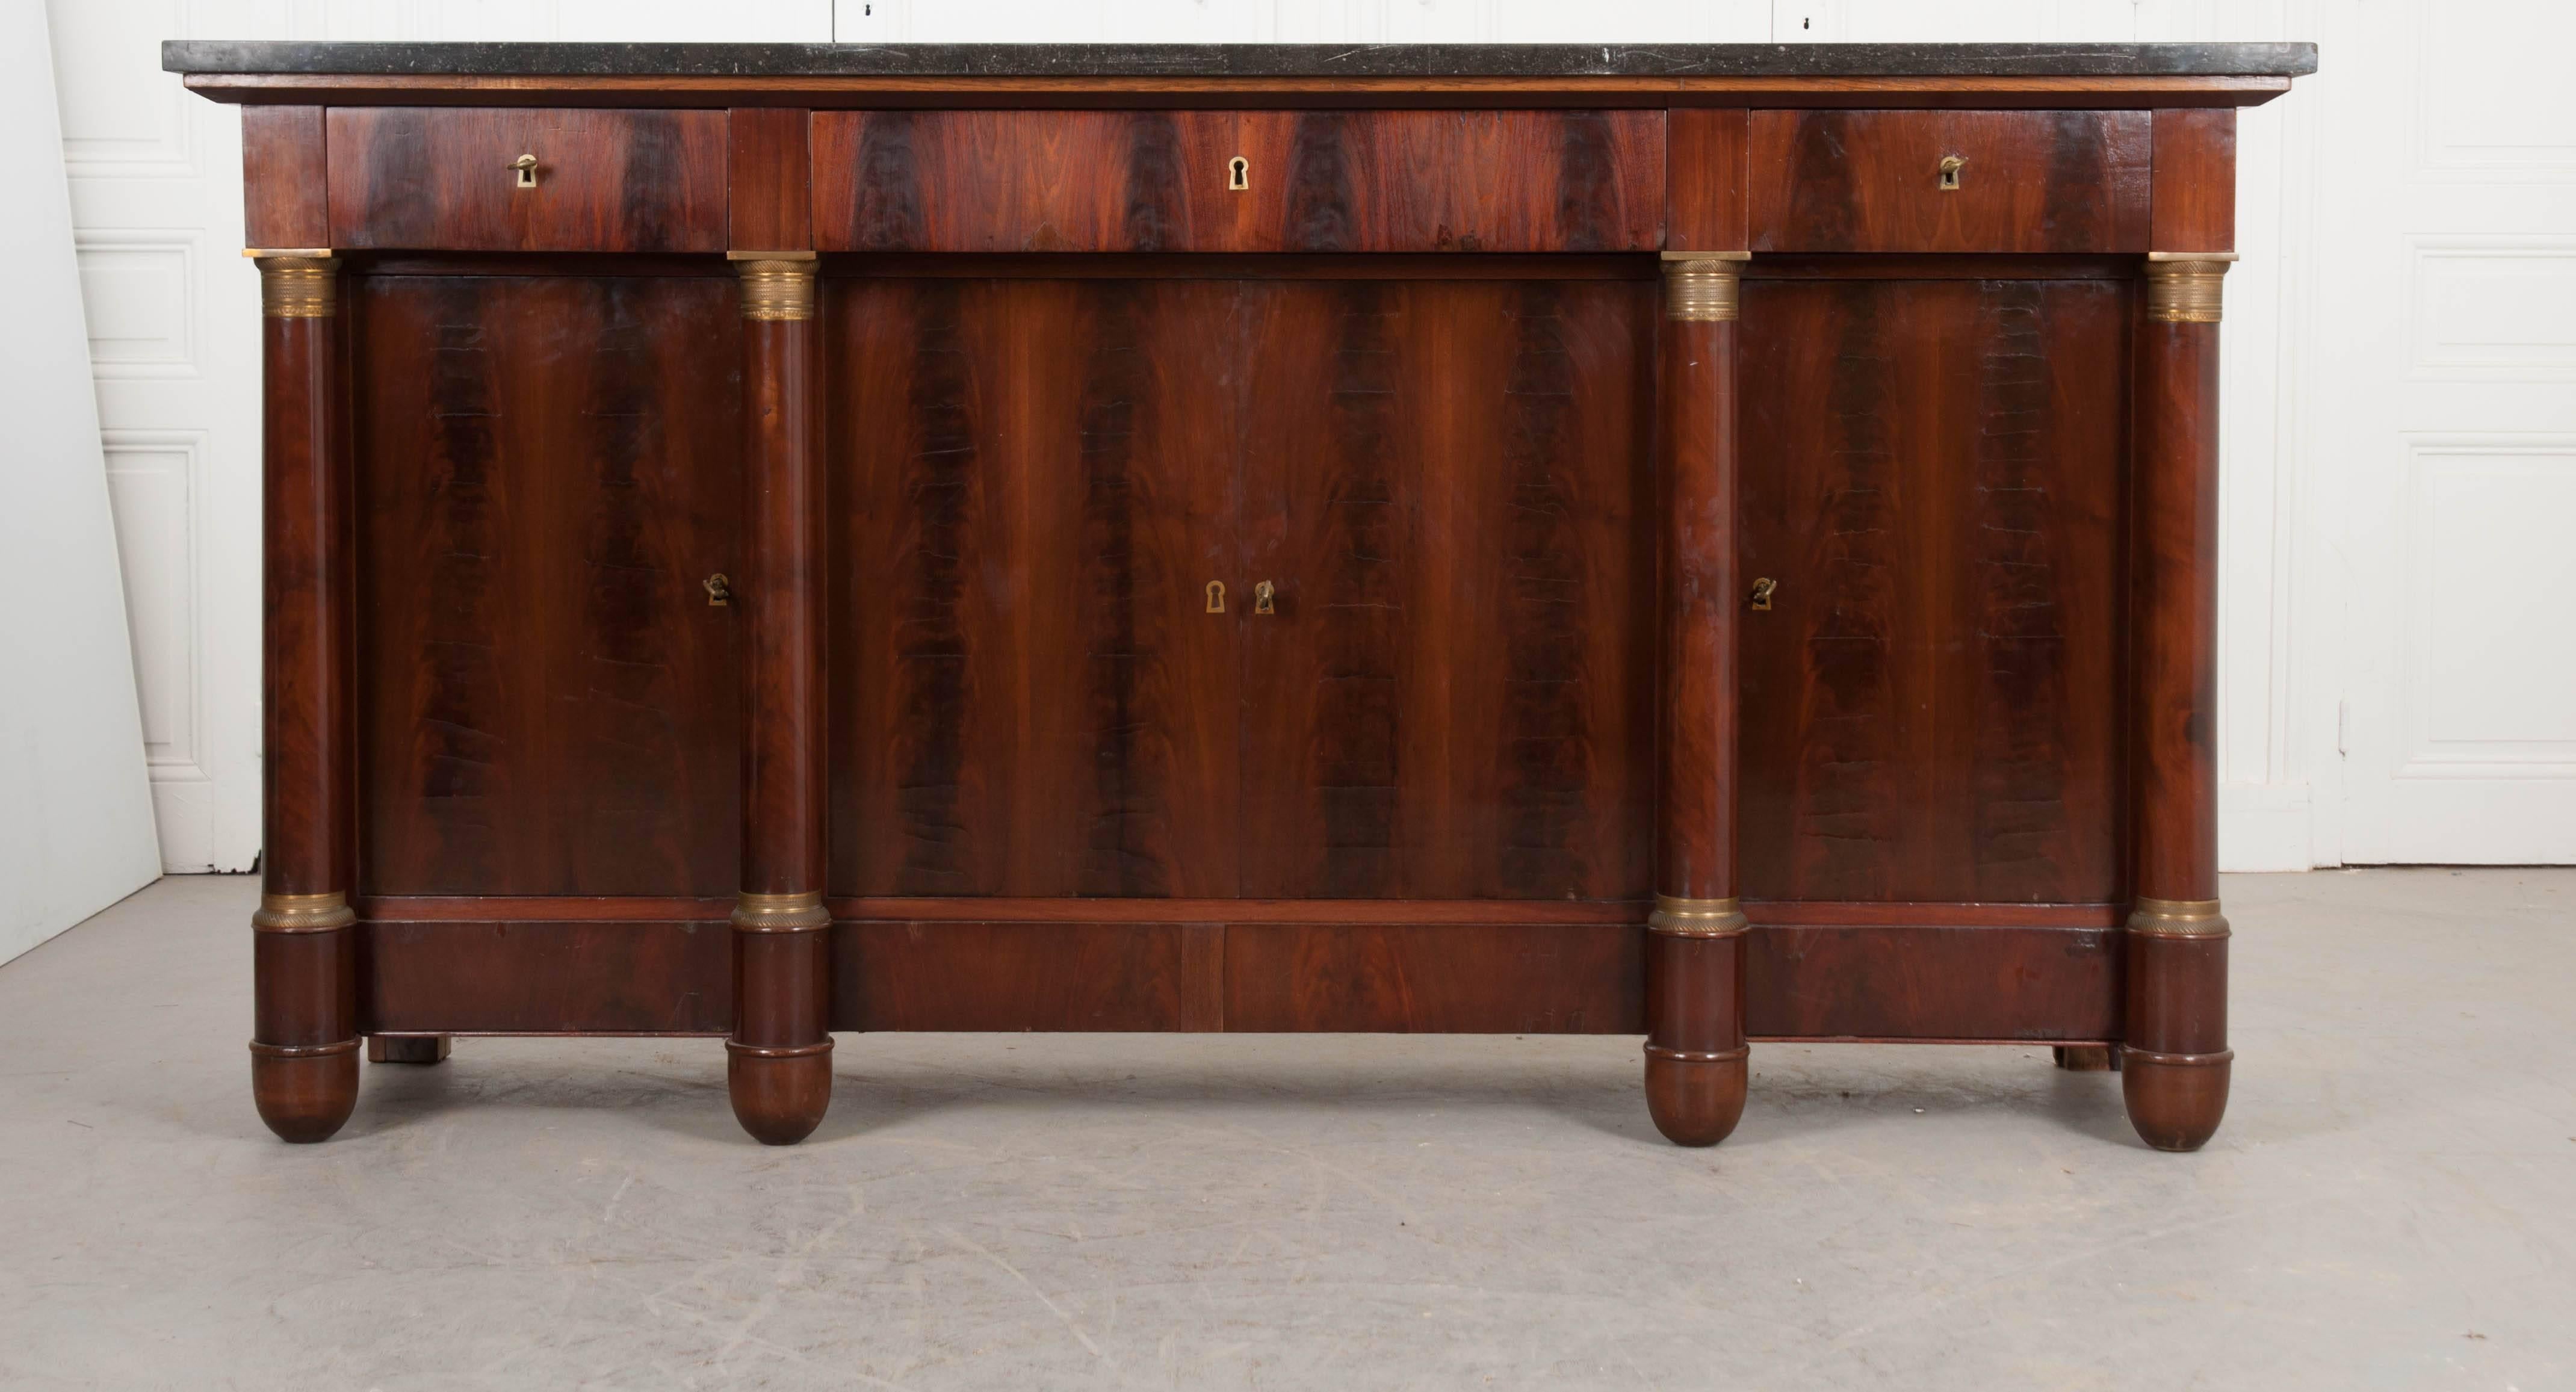 An extraordinary Empire style enfilade with black fossil marble top, made in France towards the beginning of the 20th century. The beautiful top is in wonderful antique condition, with abundant tiny fossils present. The apron contains three drawers,